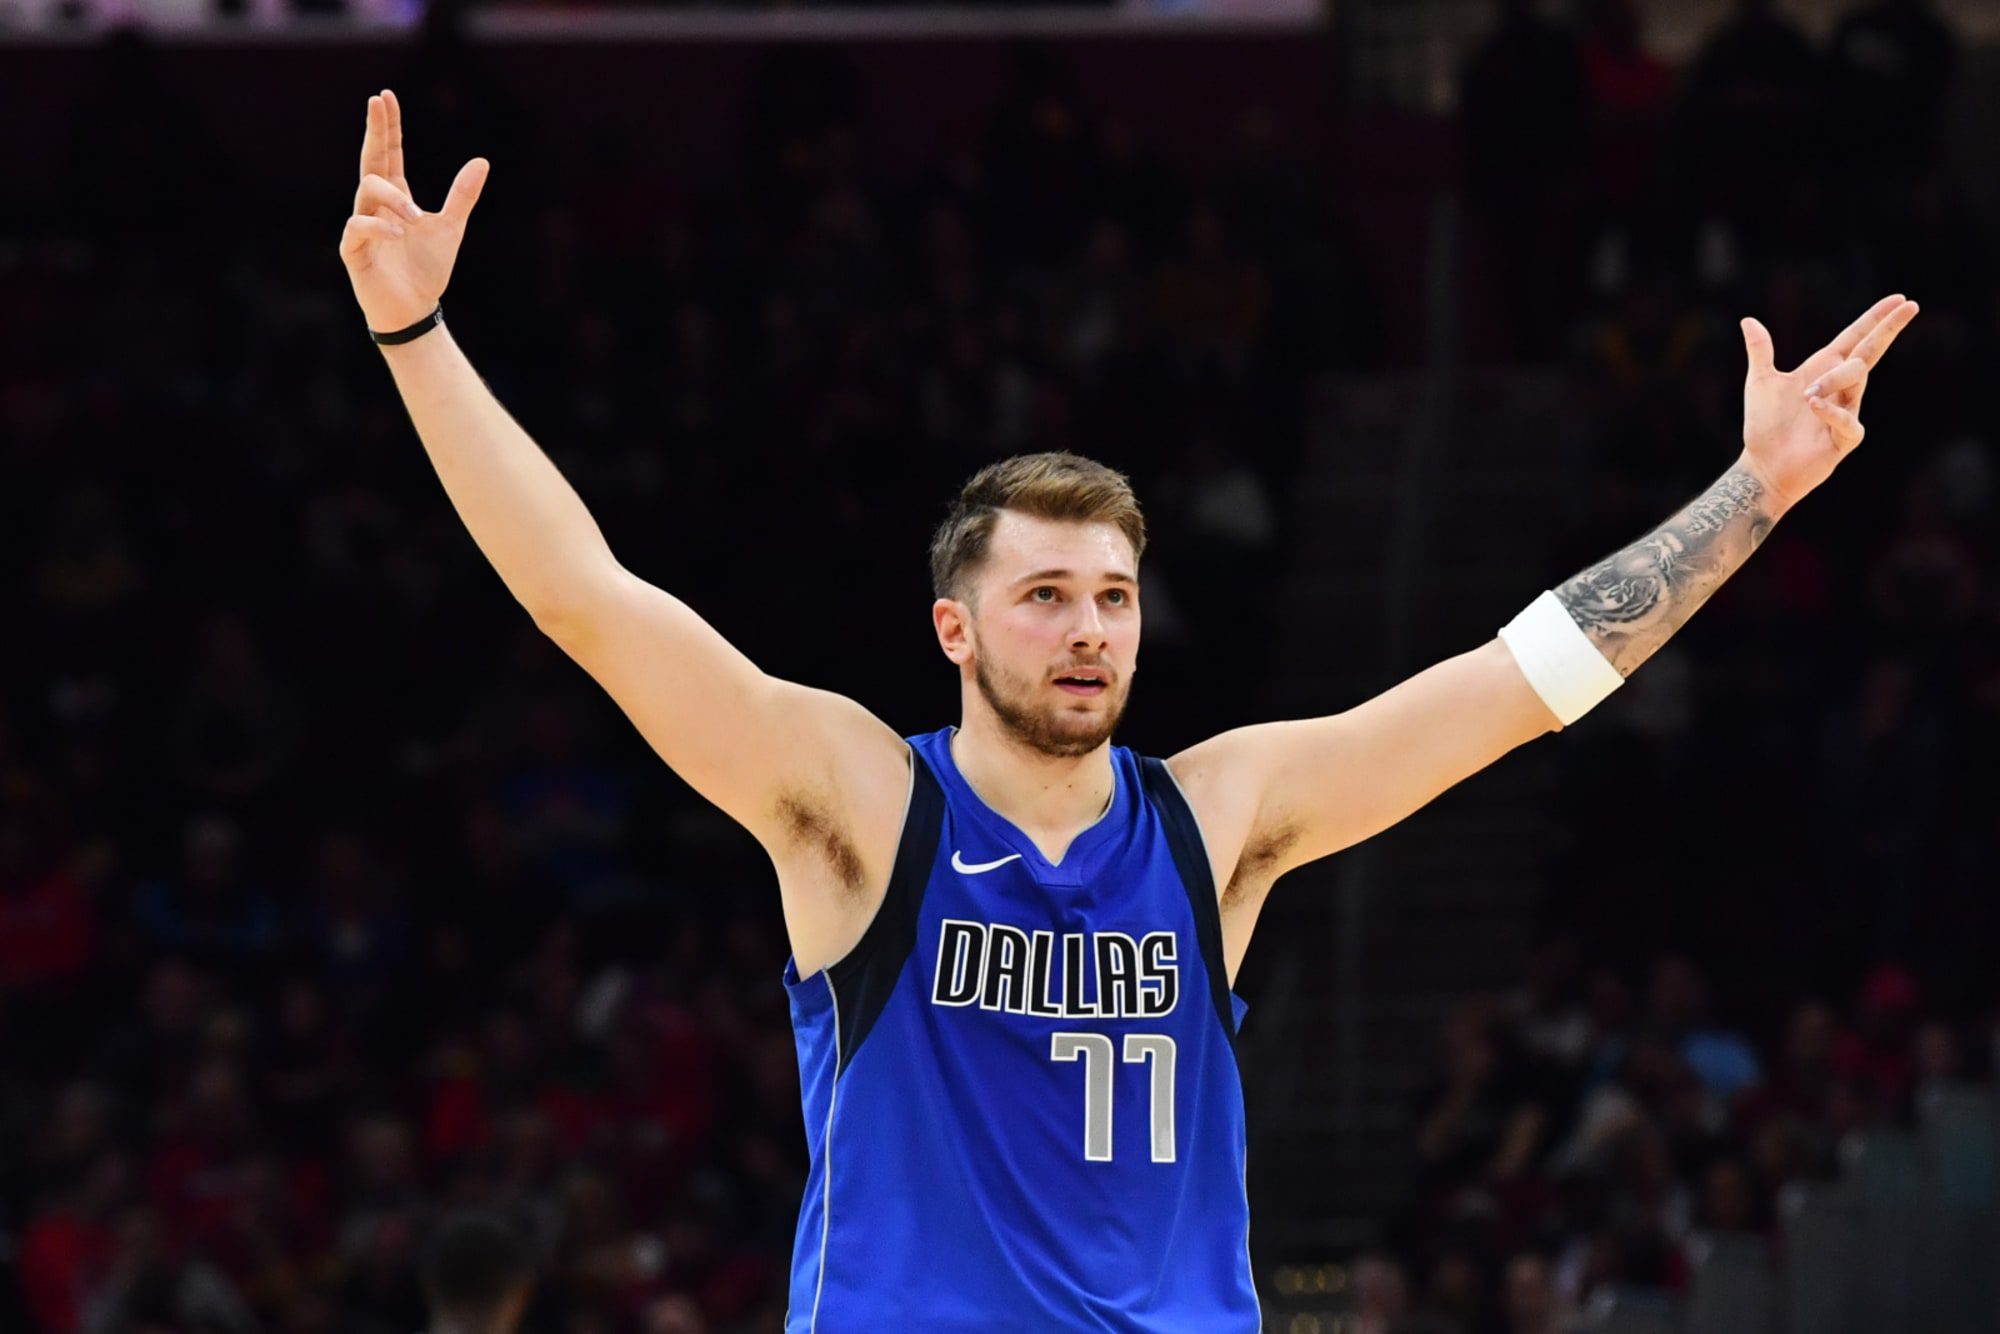 Luka Doncic Showed Up to Training Camp at 260 Pounds, Admits He Relaxed “Maybe Too Much”